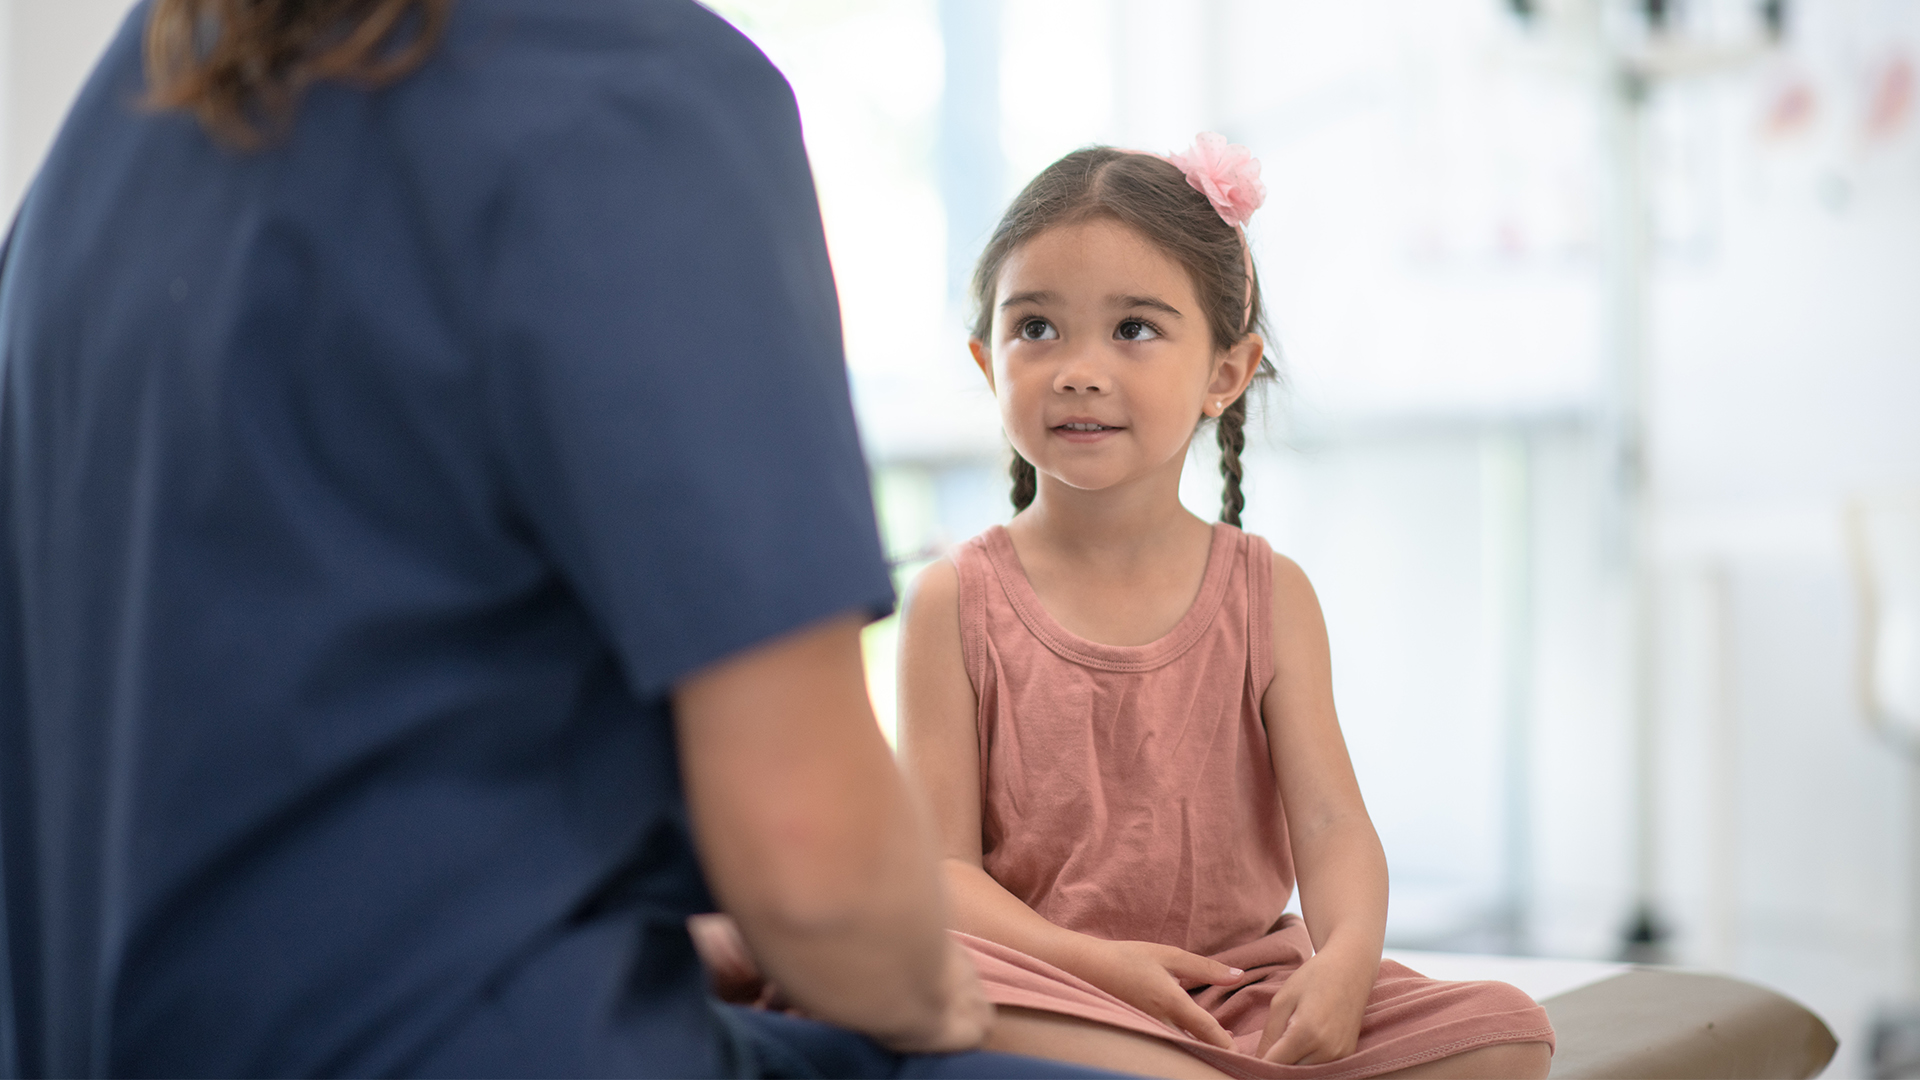 6 Ways To Calm Your Child’s Medical Anxiety